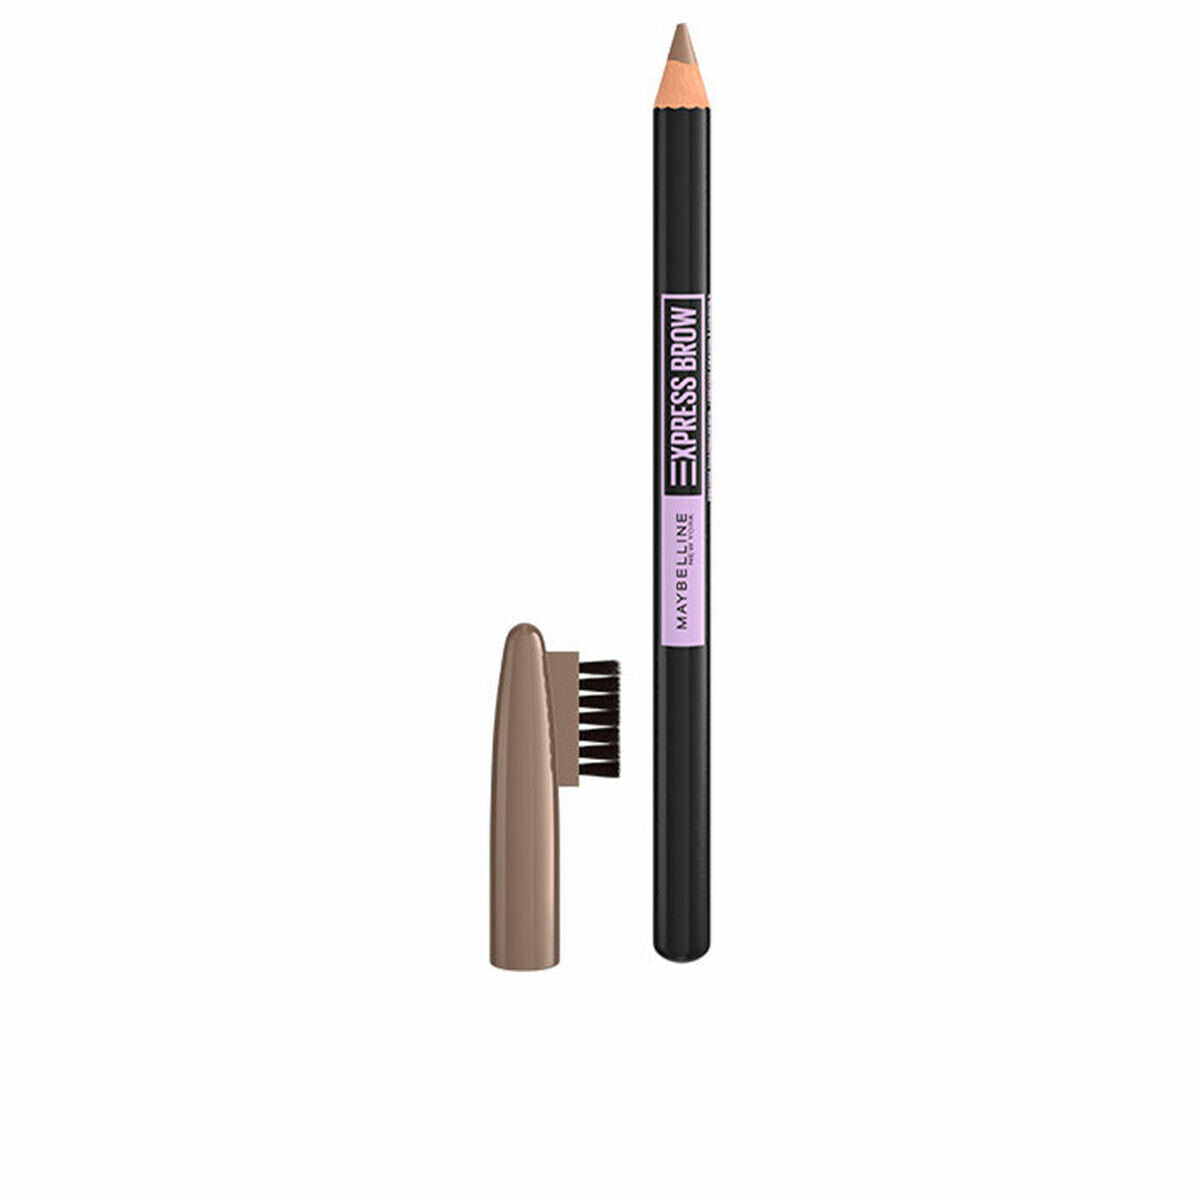 Eyebrow Pencil Maybelline Express Brow 03-soft brown (4,3 g)